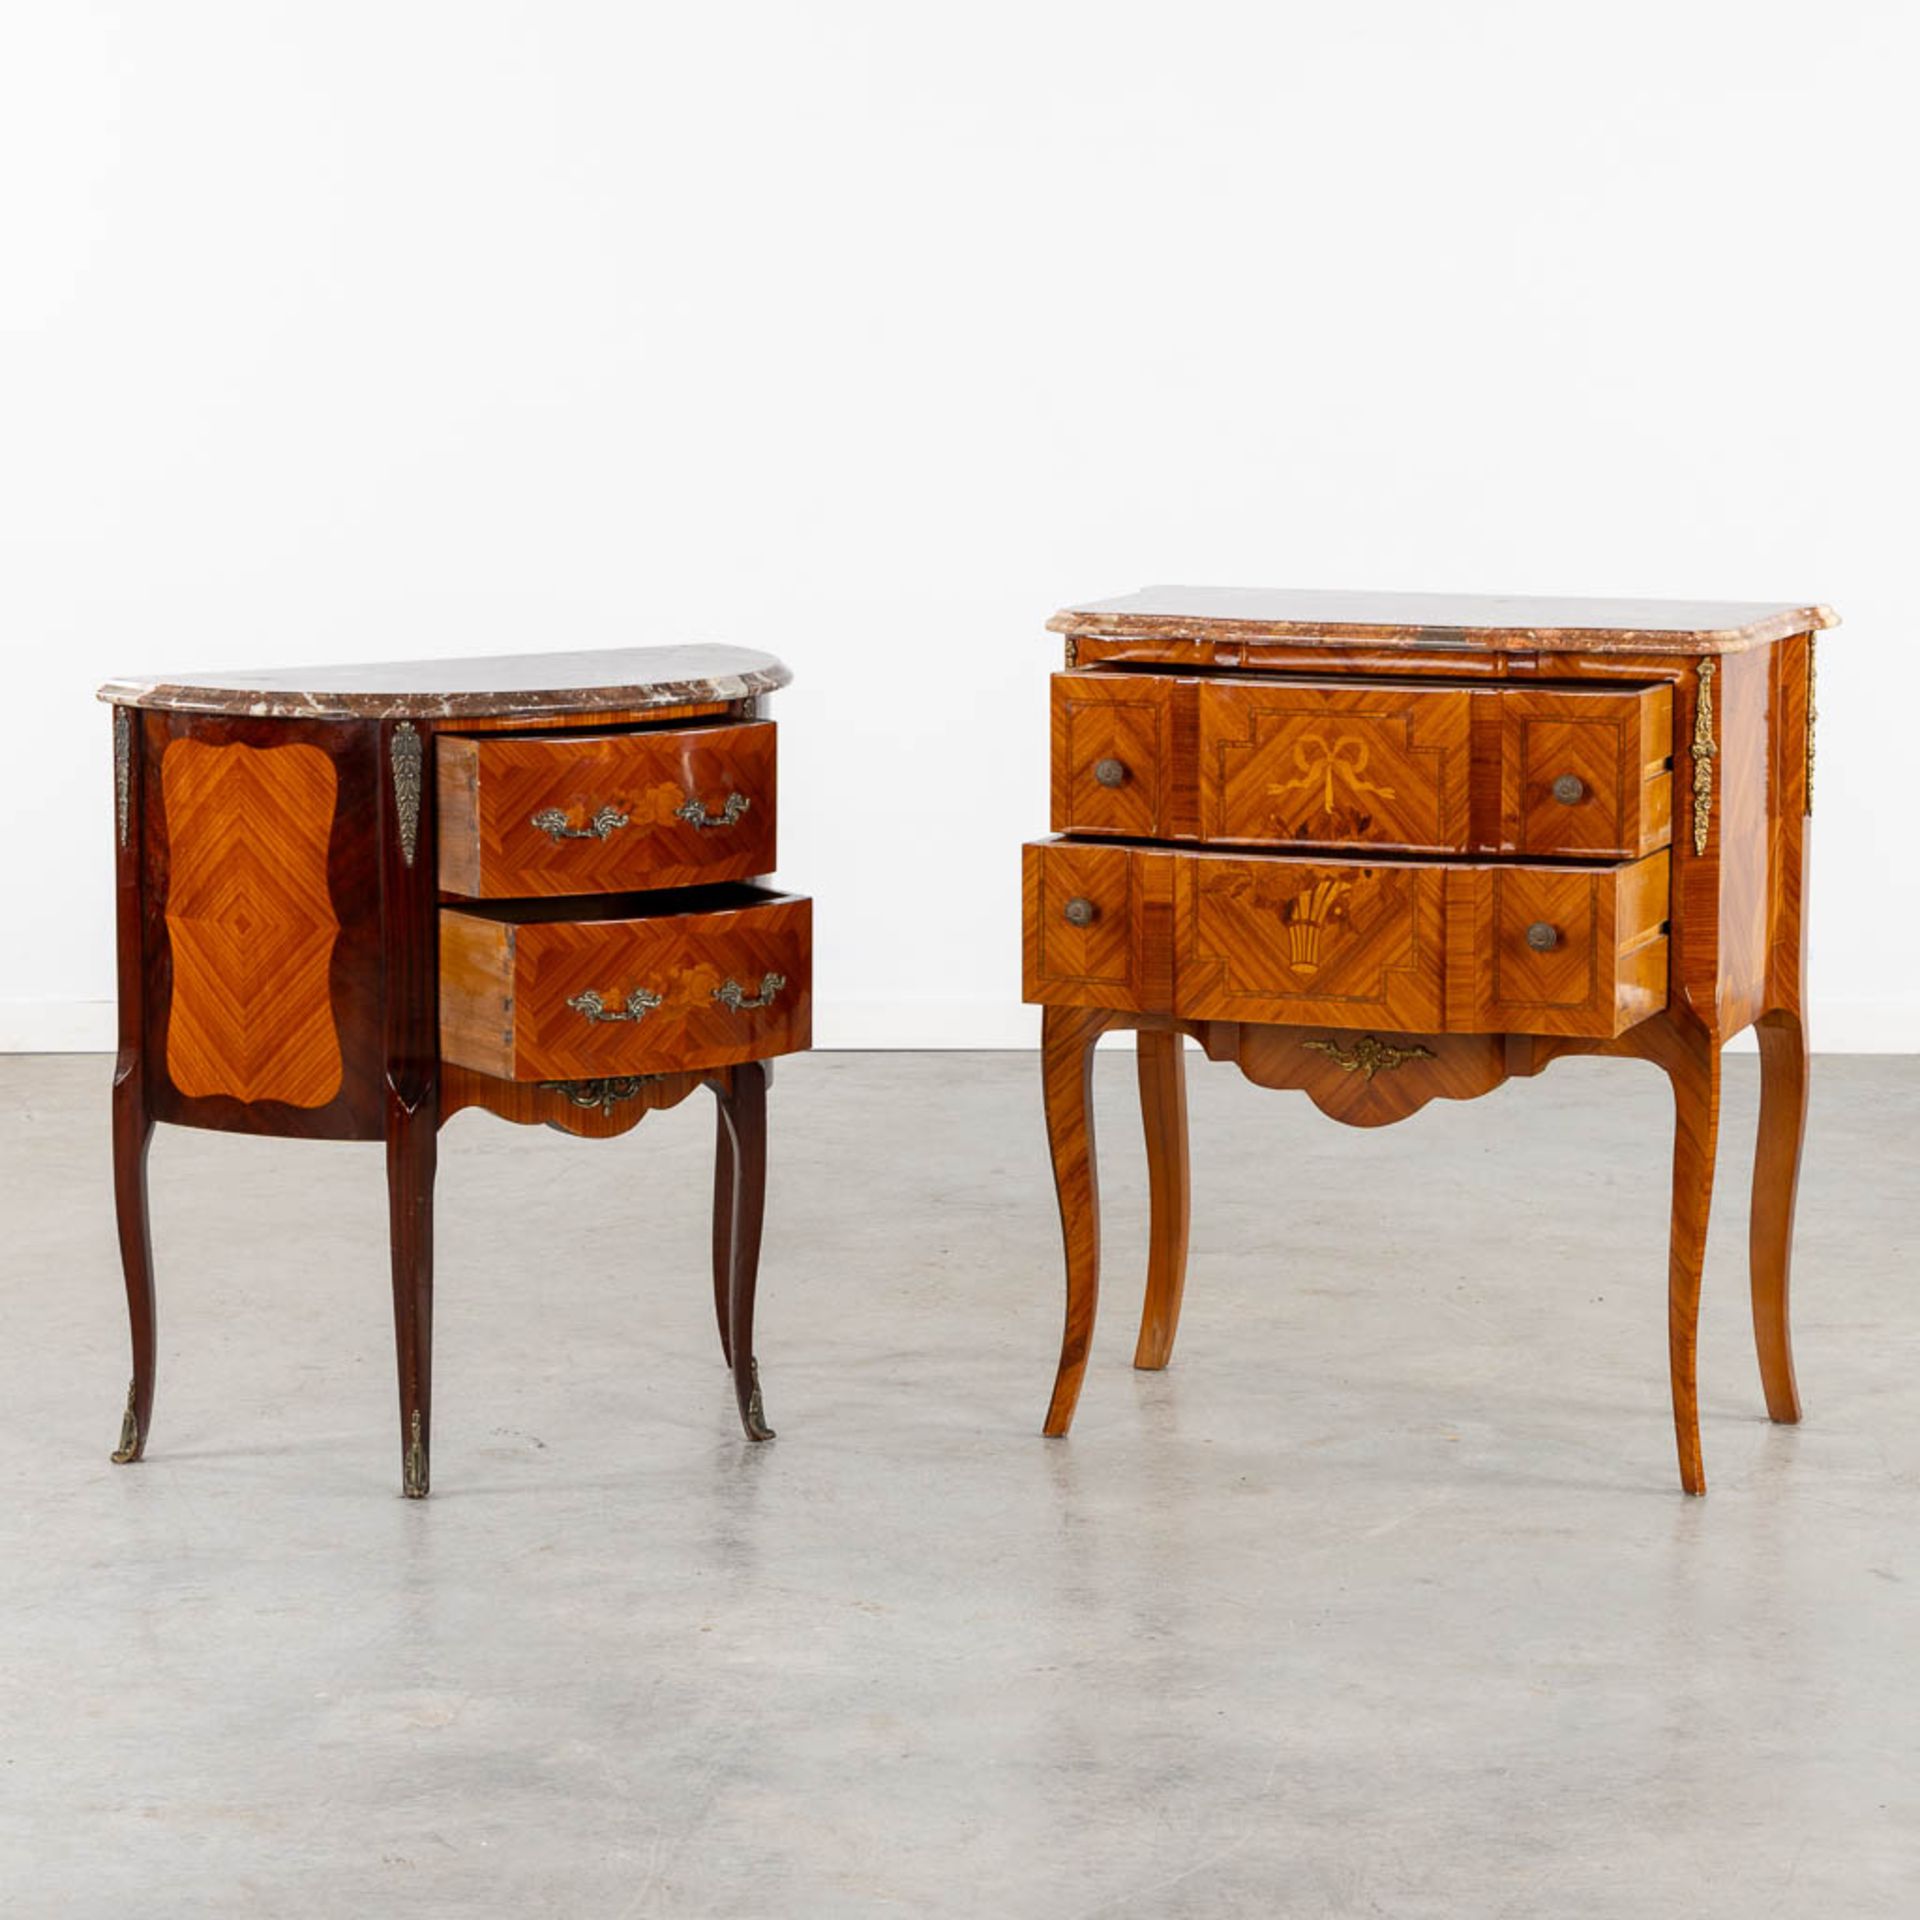 Two small cabinets with drawers, marquetry inlay and a marble top. 20th C. (L:39 x W:70 x H:80 cm) - Bild 3 aus 11